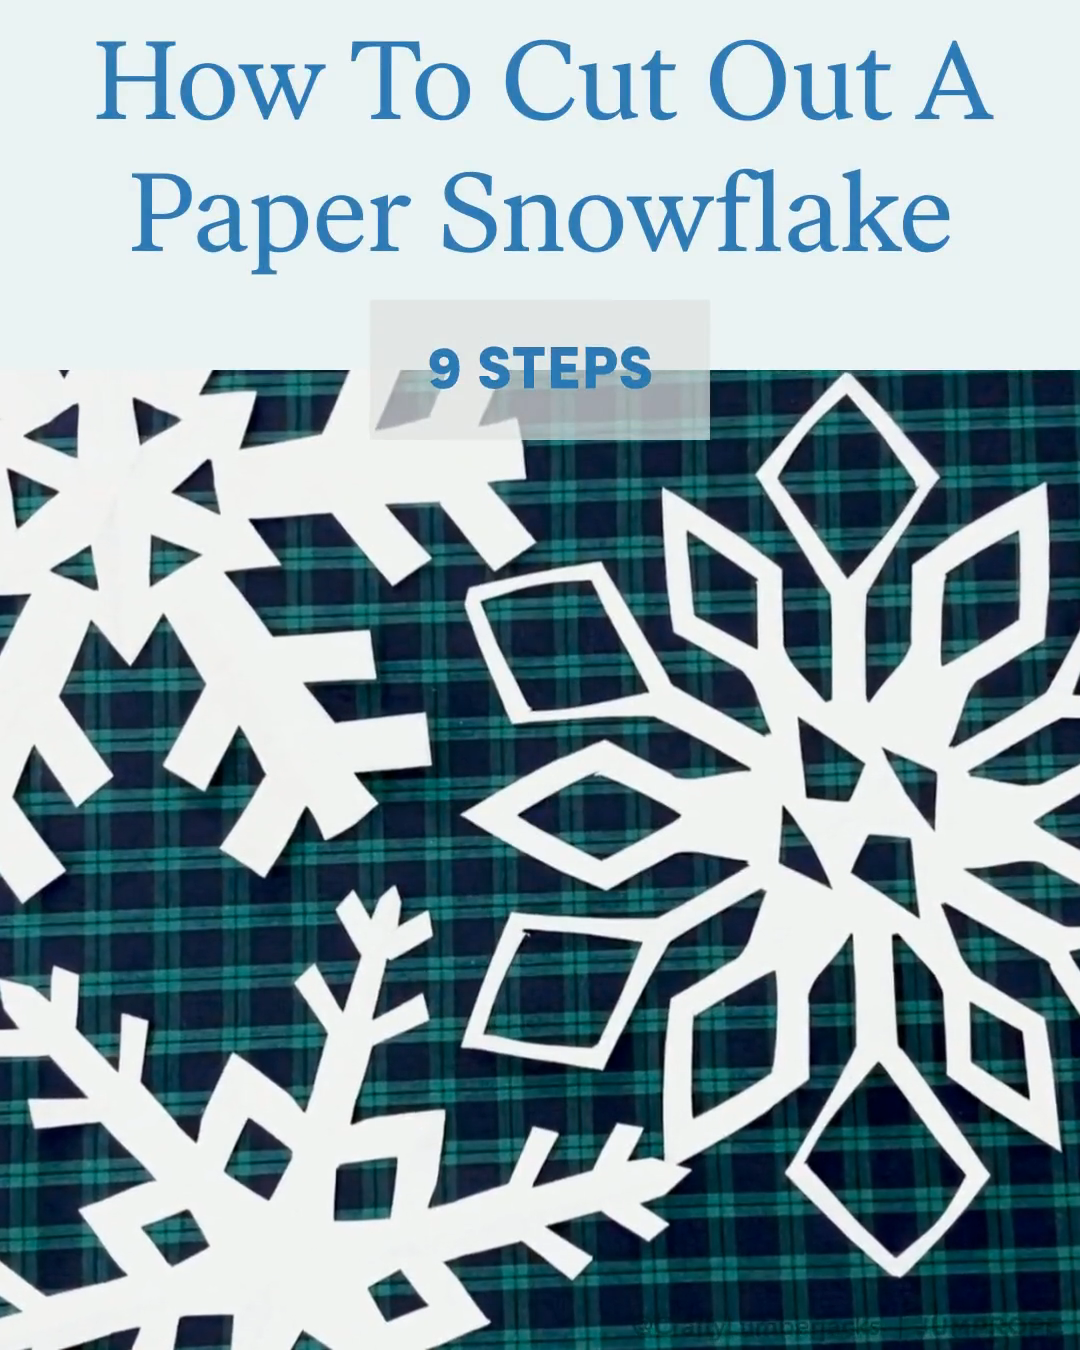 How To Cut Out A Paper Snowflake - How To Cut Out A Paper Snowflake -   diy Christmas snowflakes